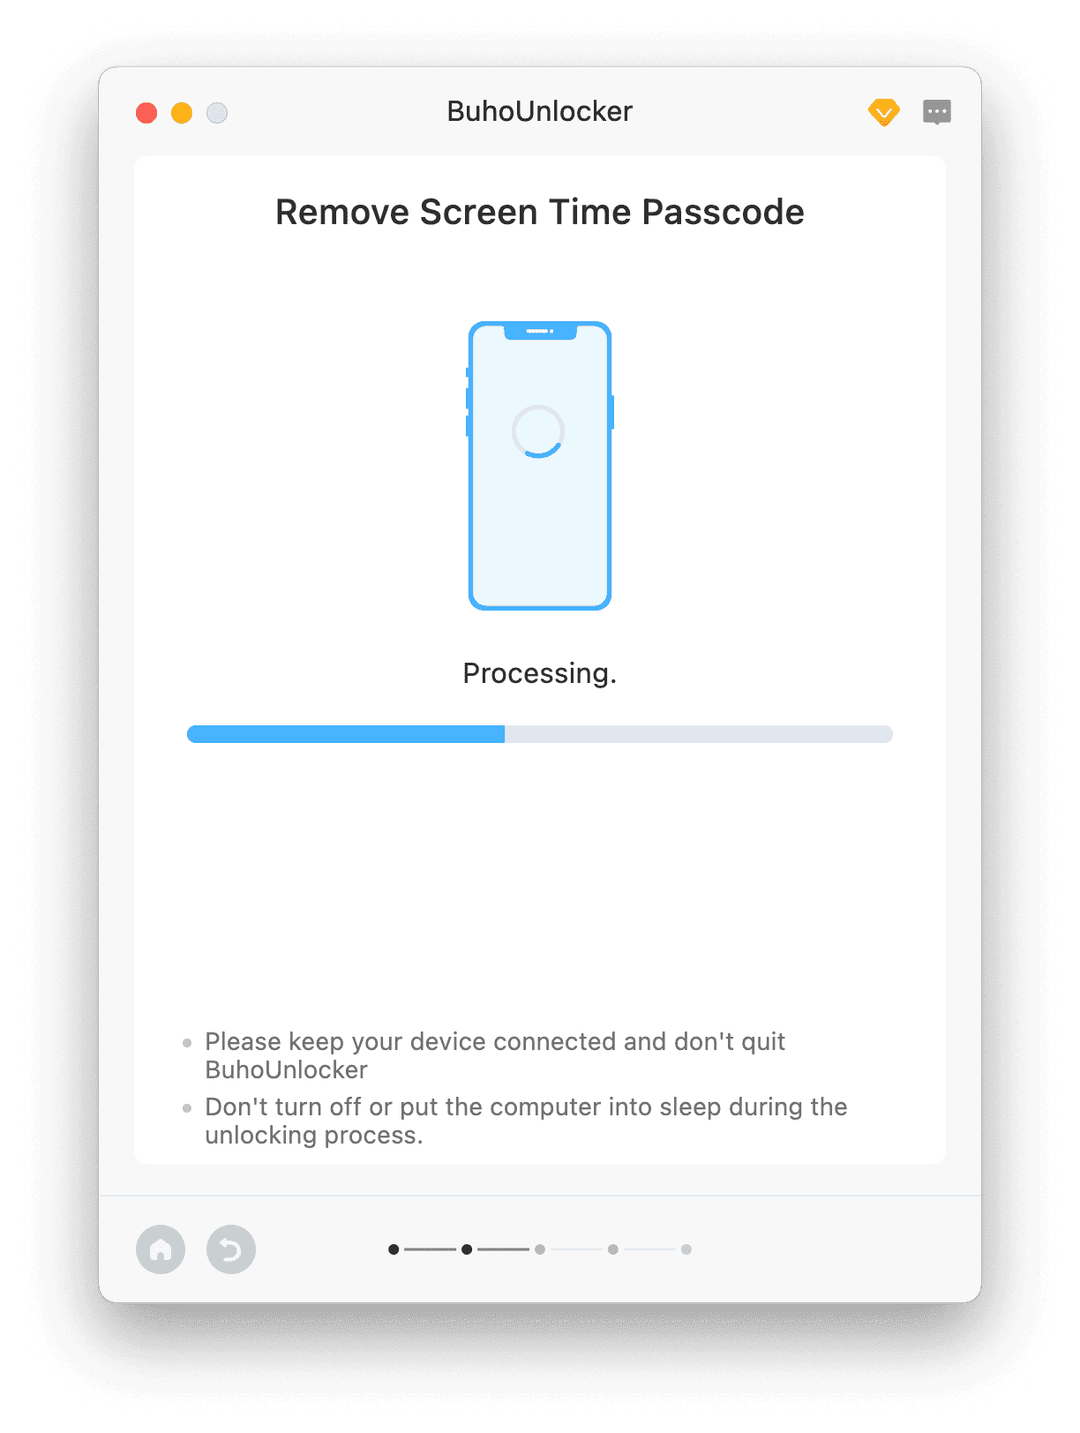 Removing Screen Time Passcode in Progress